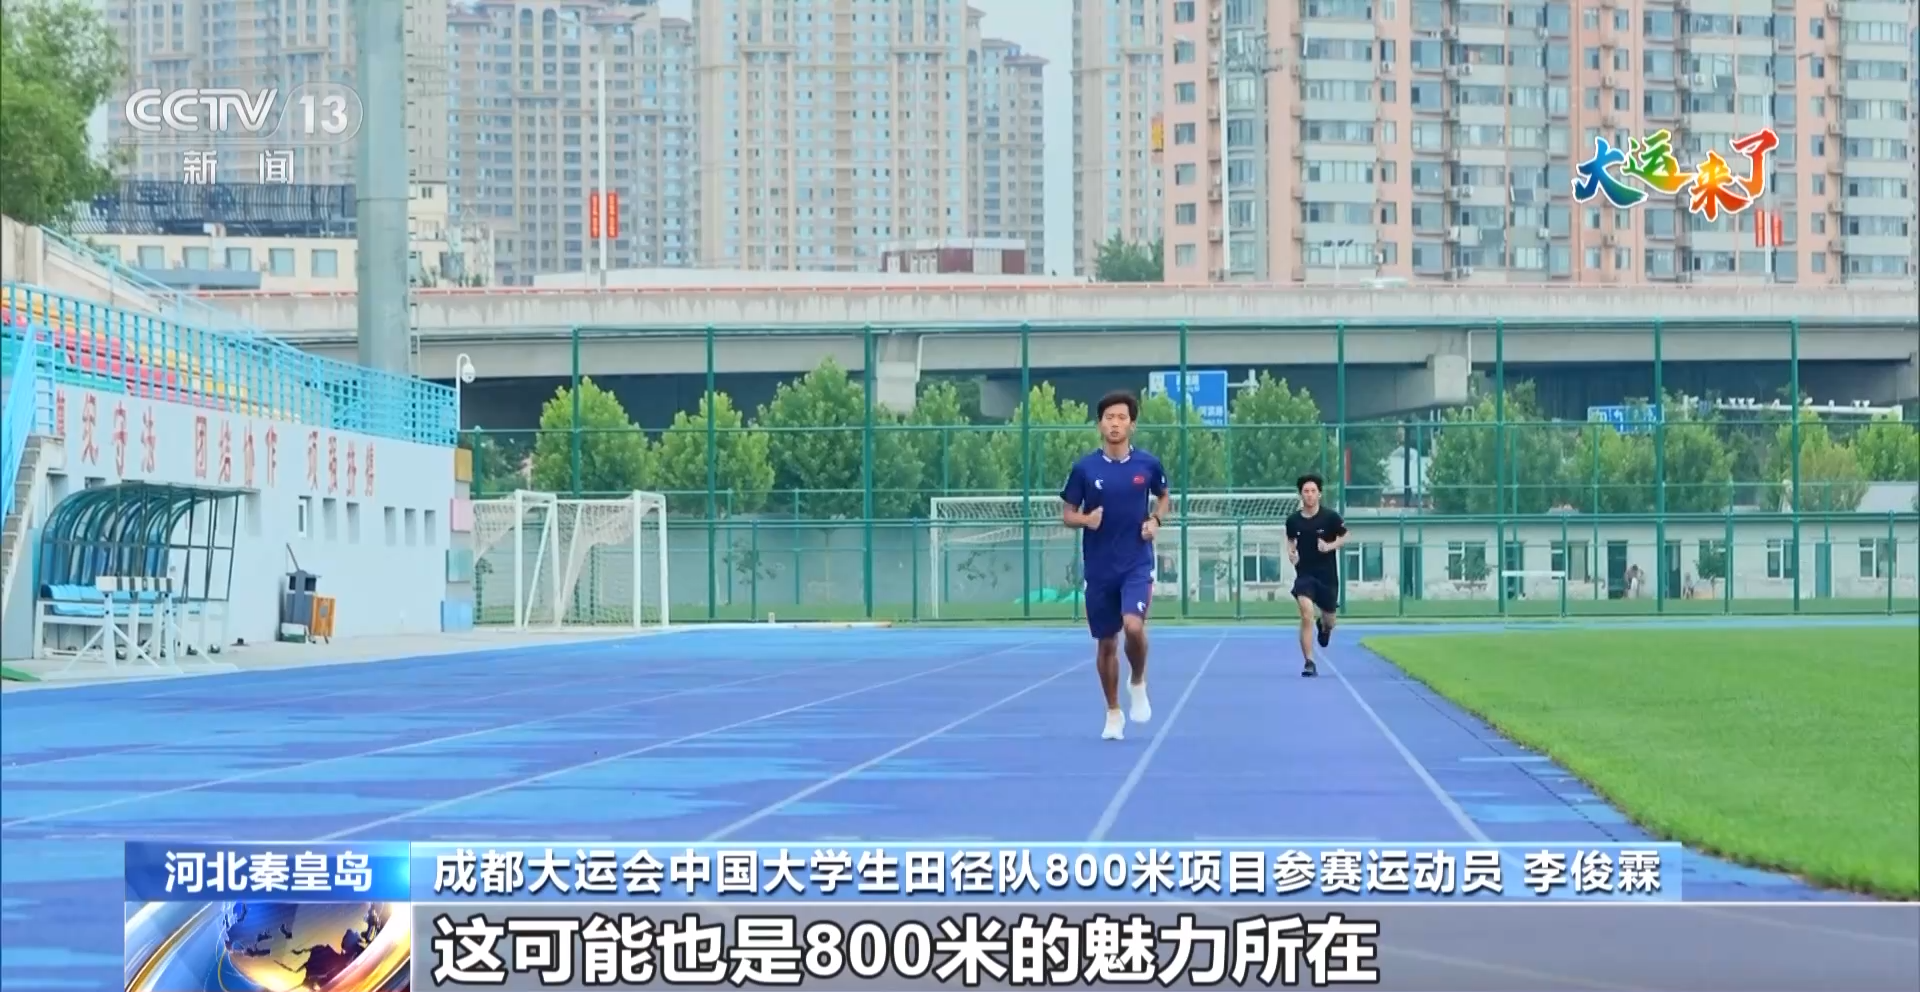 Li Junlin of the Chinese athletics team for the World University Games trains in Qinhuangdao, north China's Hebei Province, July 17, 2023. /China Media Group